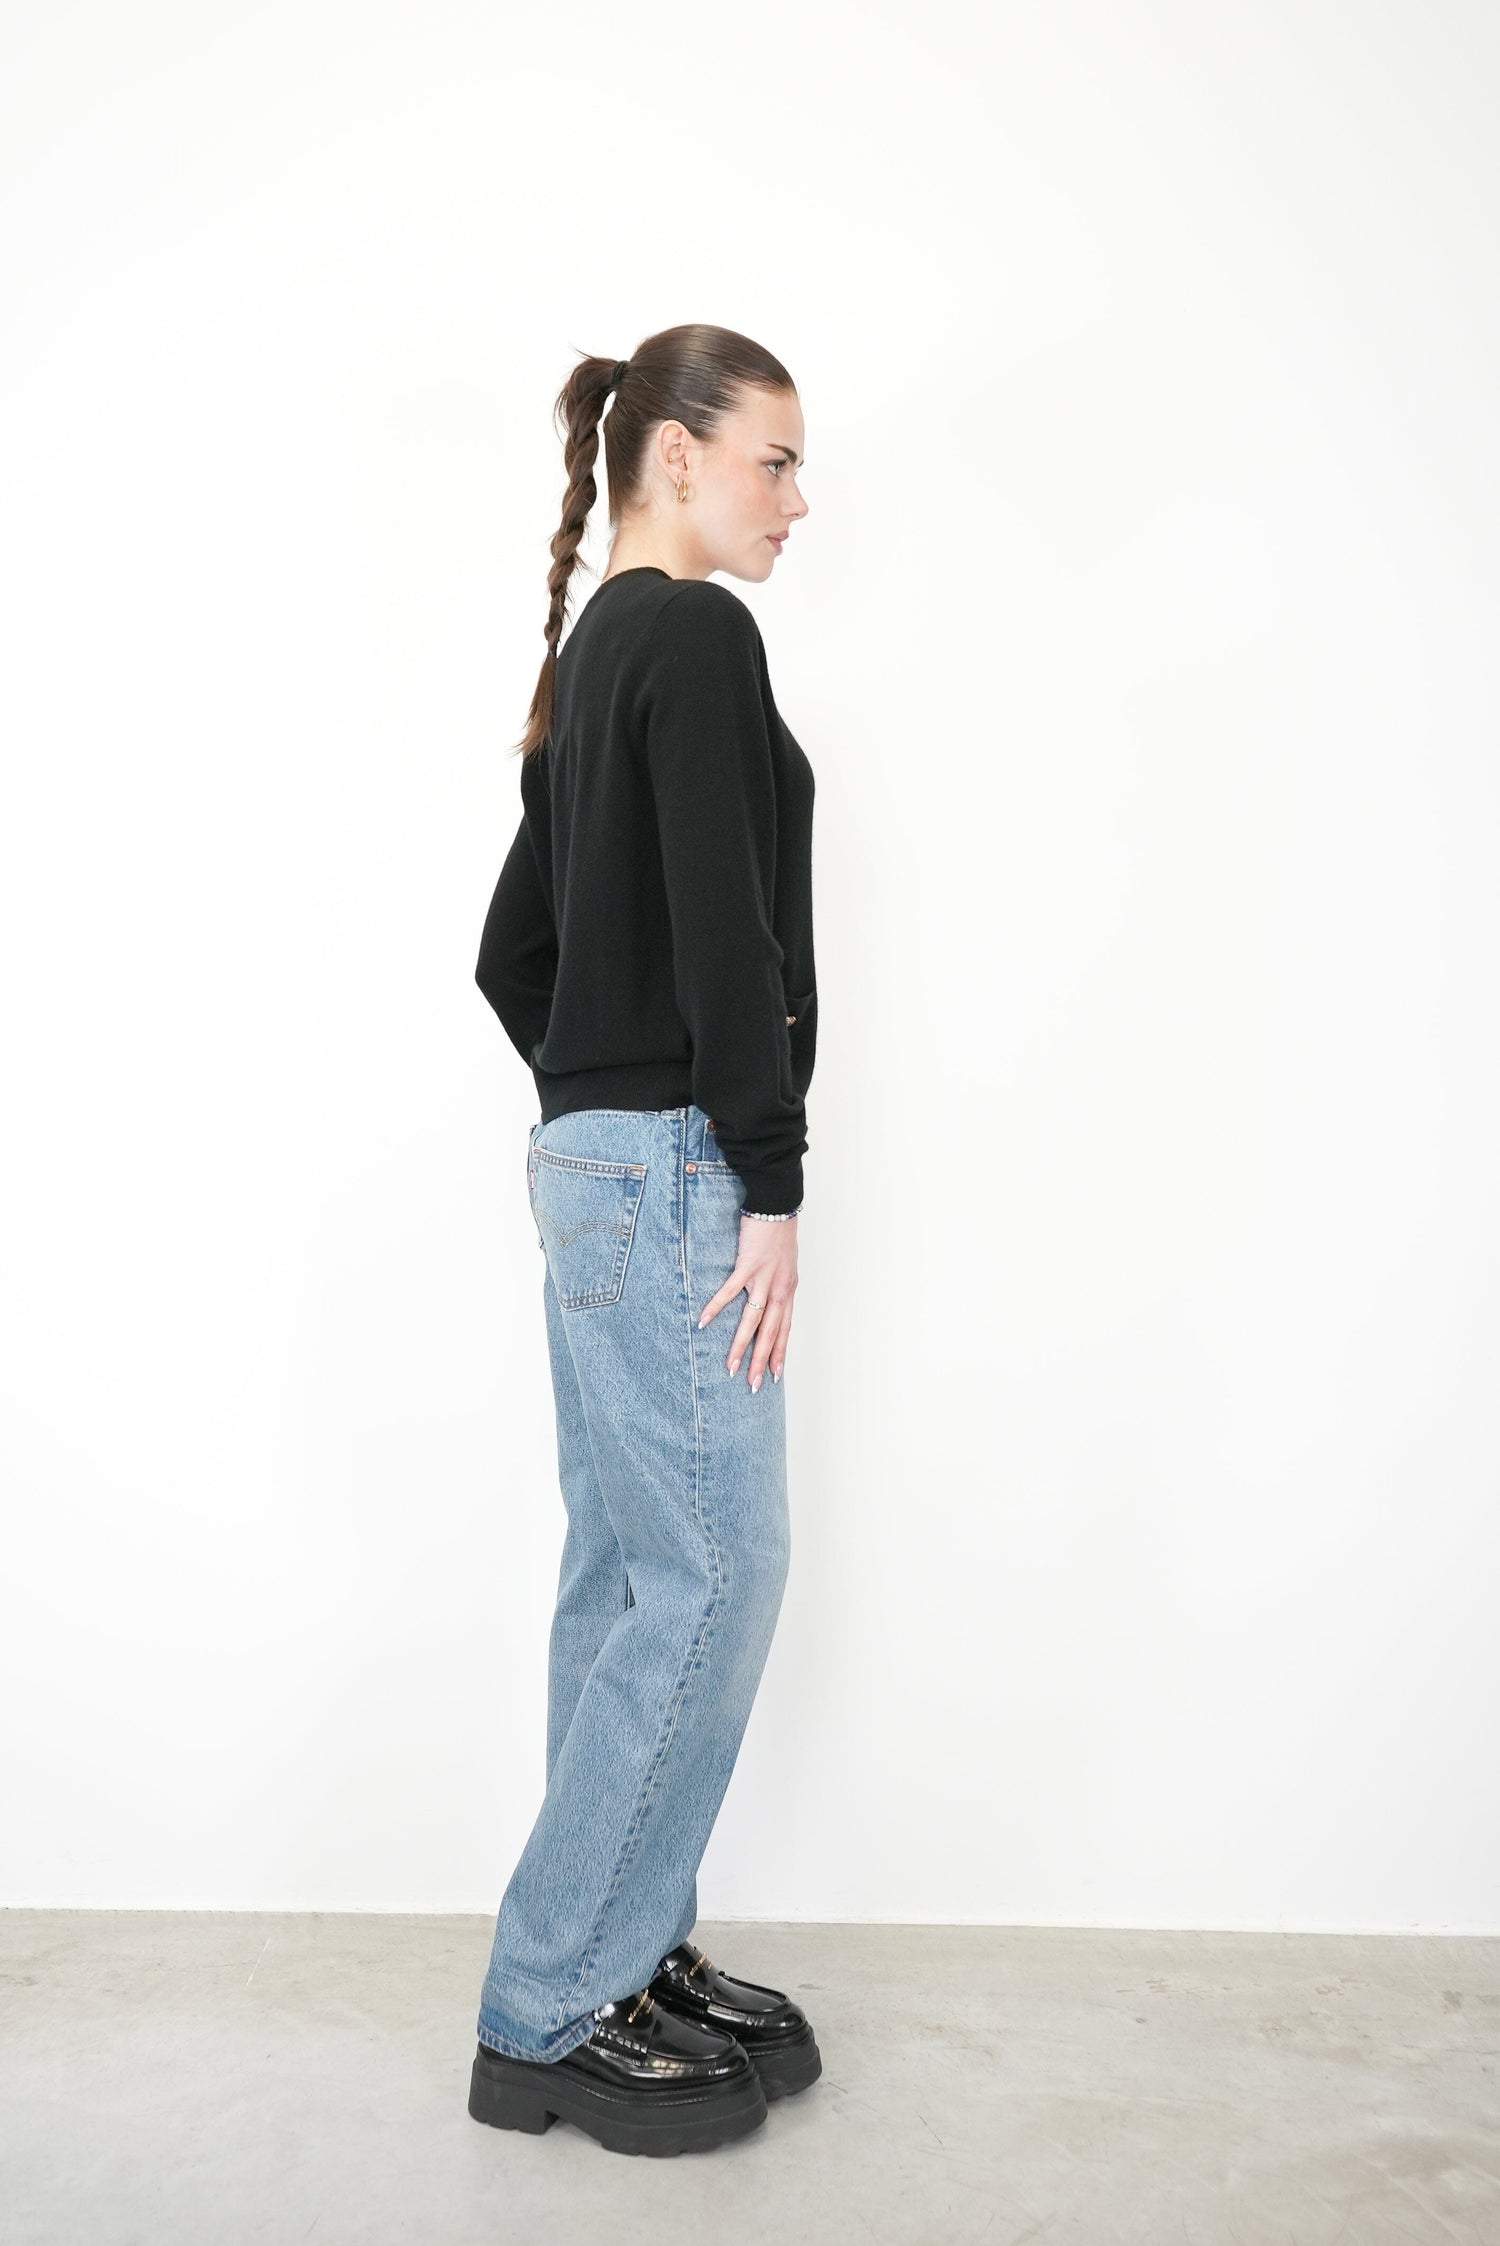 501 90'S JEANS IN CLEAR ADVANTAGE JEANS LEVIS 